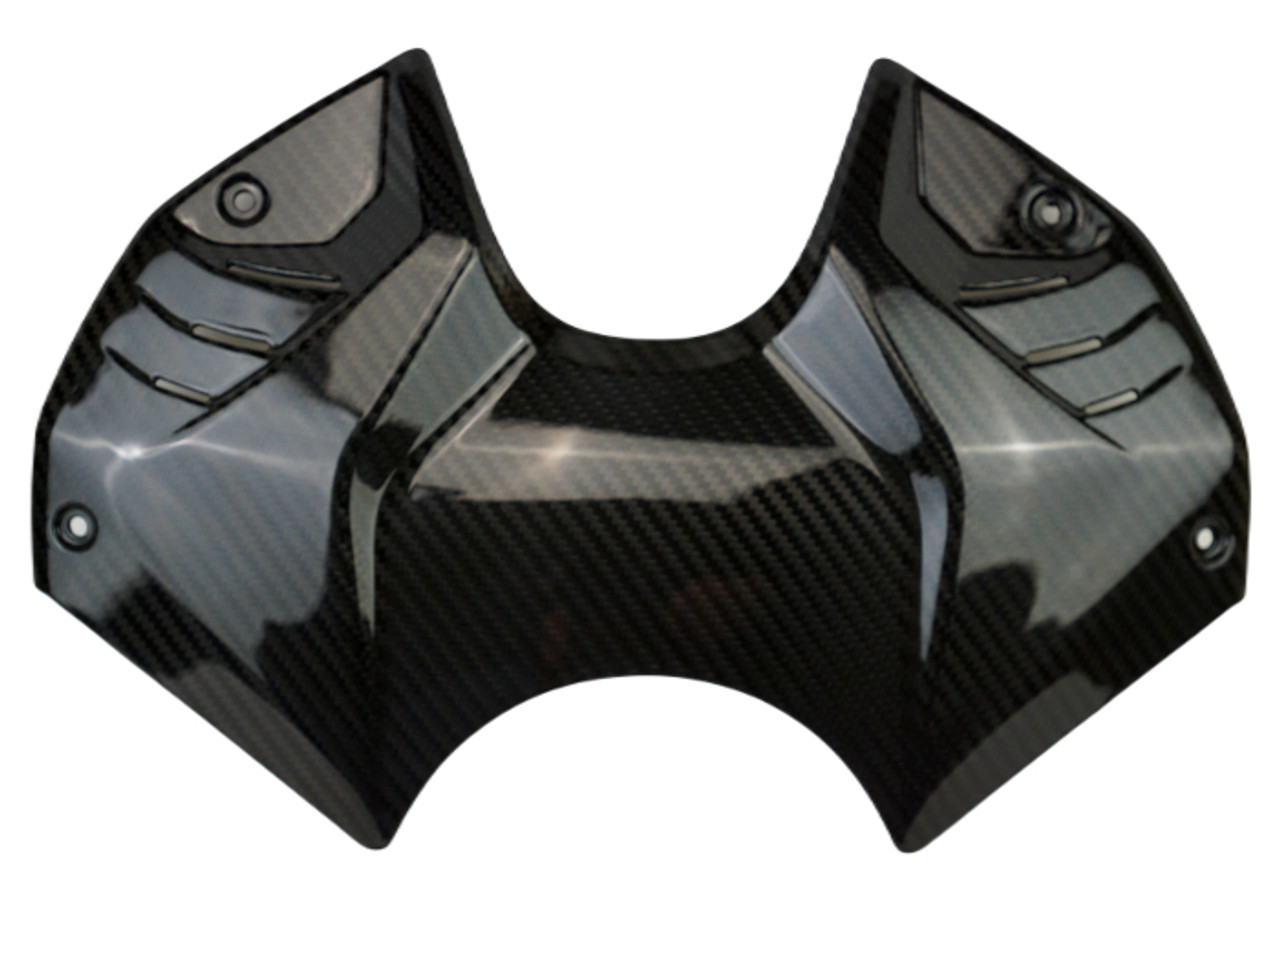 Tank Cover DP Style in Glossy Twill Weave Carbon Fiber for Ducati Streetfighter V4 2020-2022